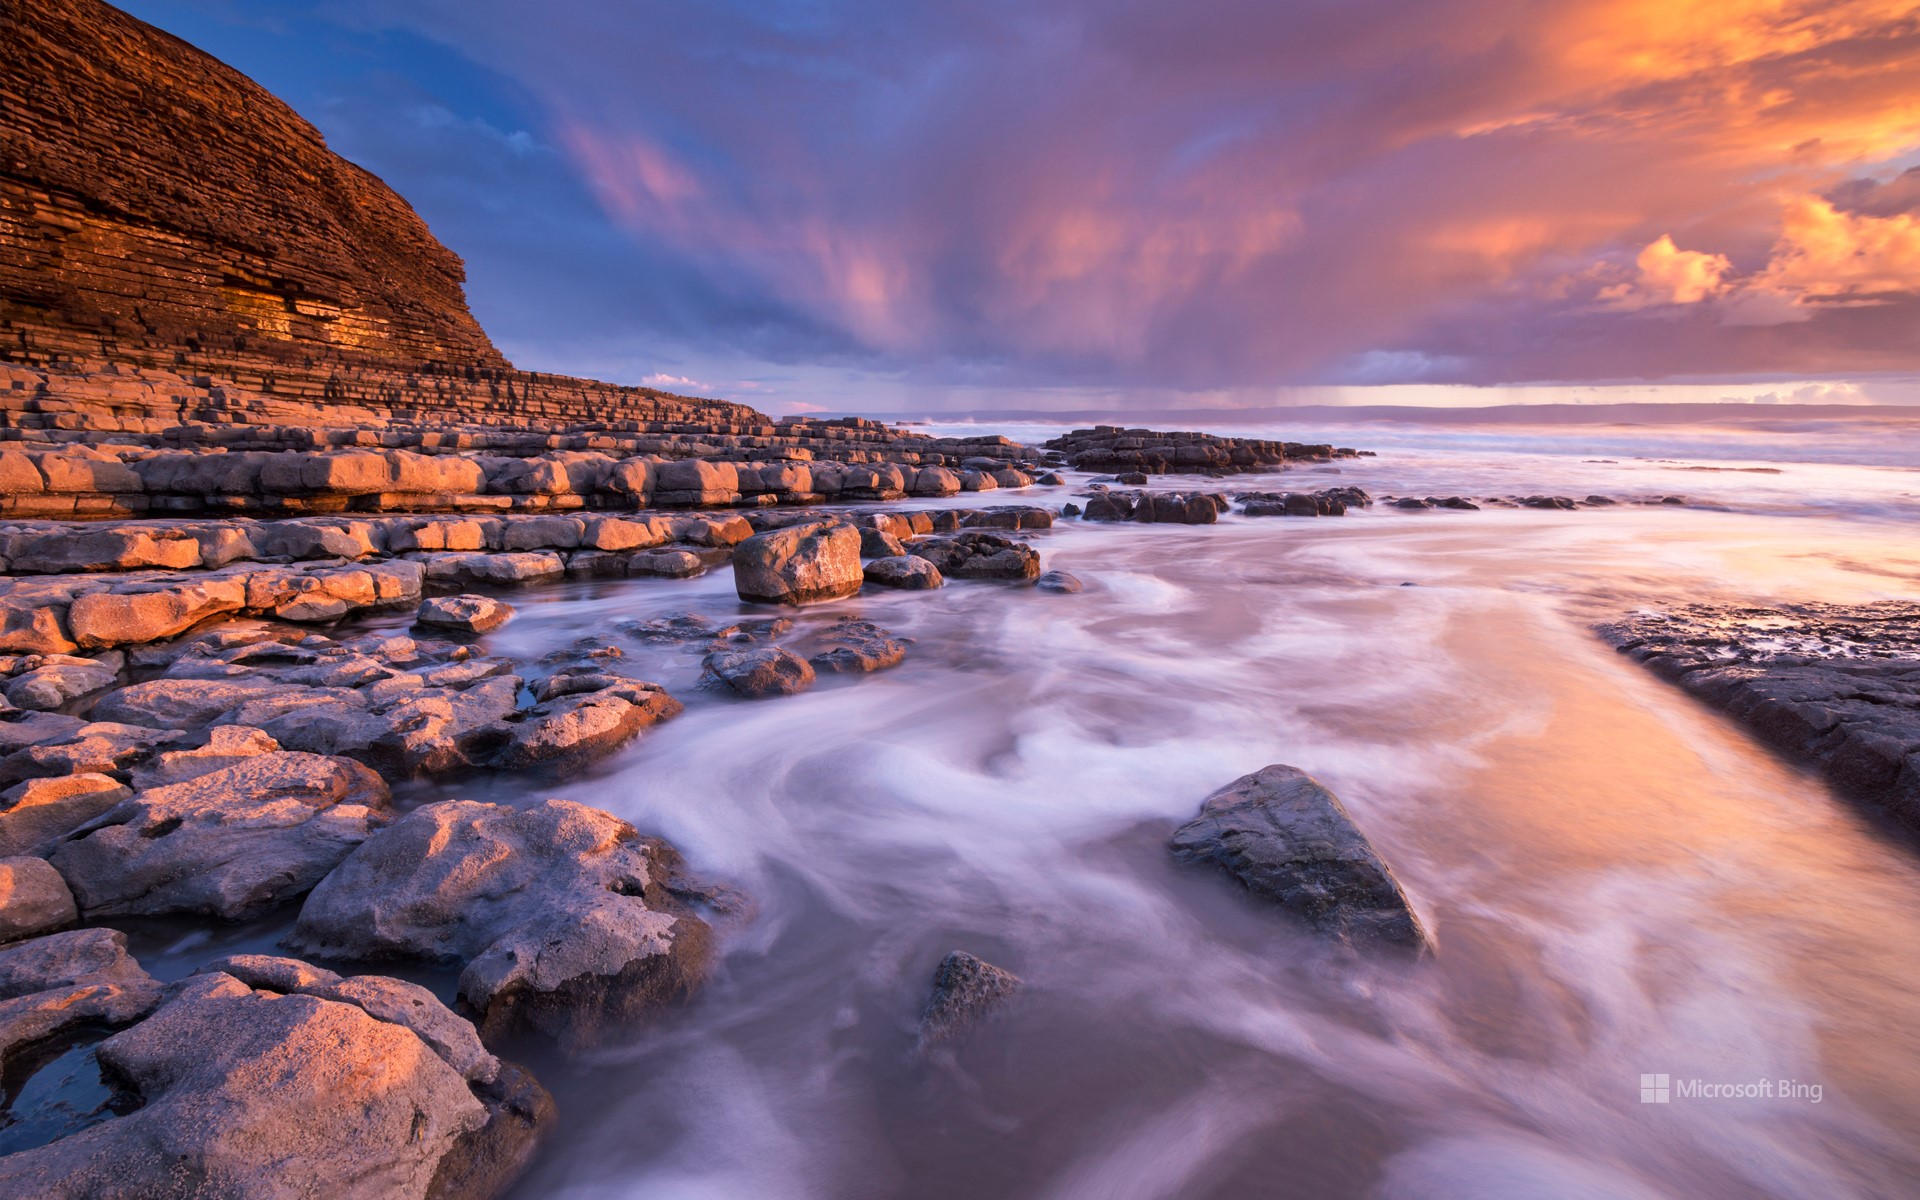 Sunset over Nash Point on the Glamorgan Heritage Coast, South Wales in winter.